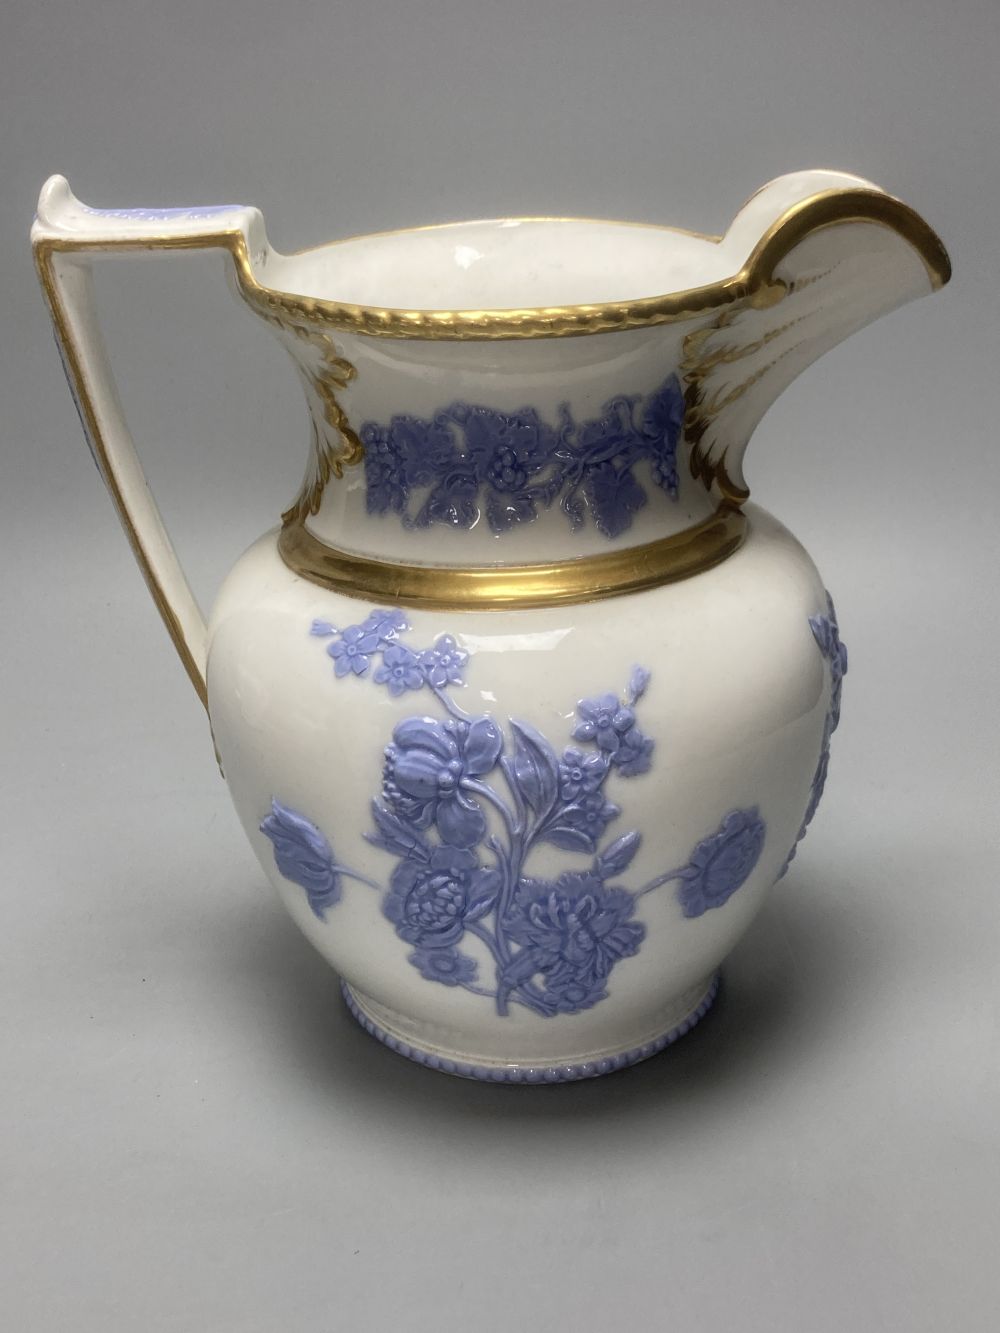 Four early 19th century Staffordshire jugs, each with lilac coloured floral applied panels, one dated 1826, tallest 22cm